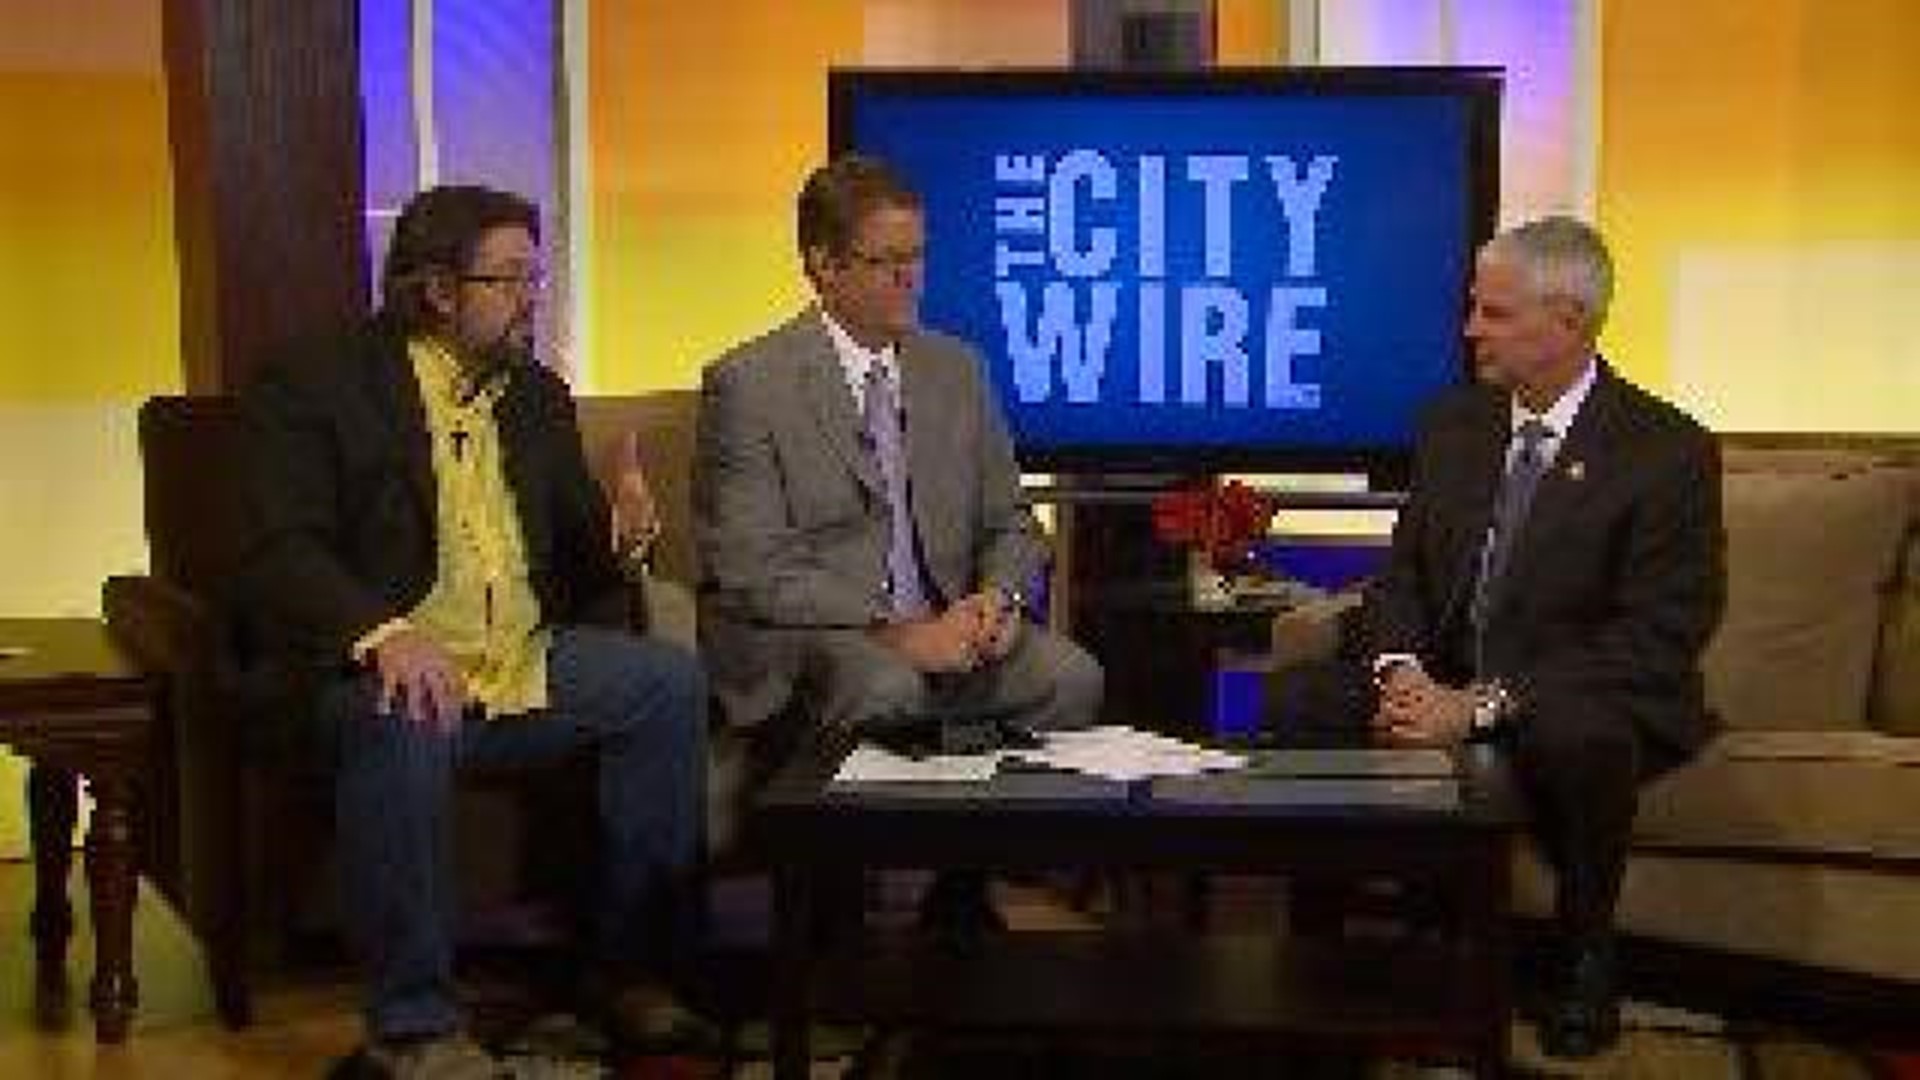 Congressman Womack On The City Wire